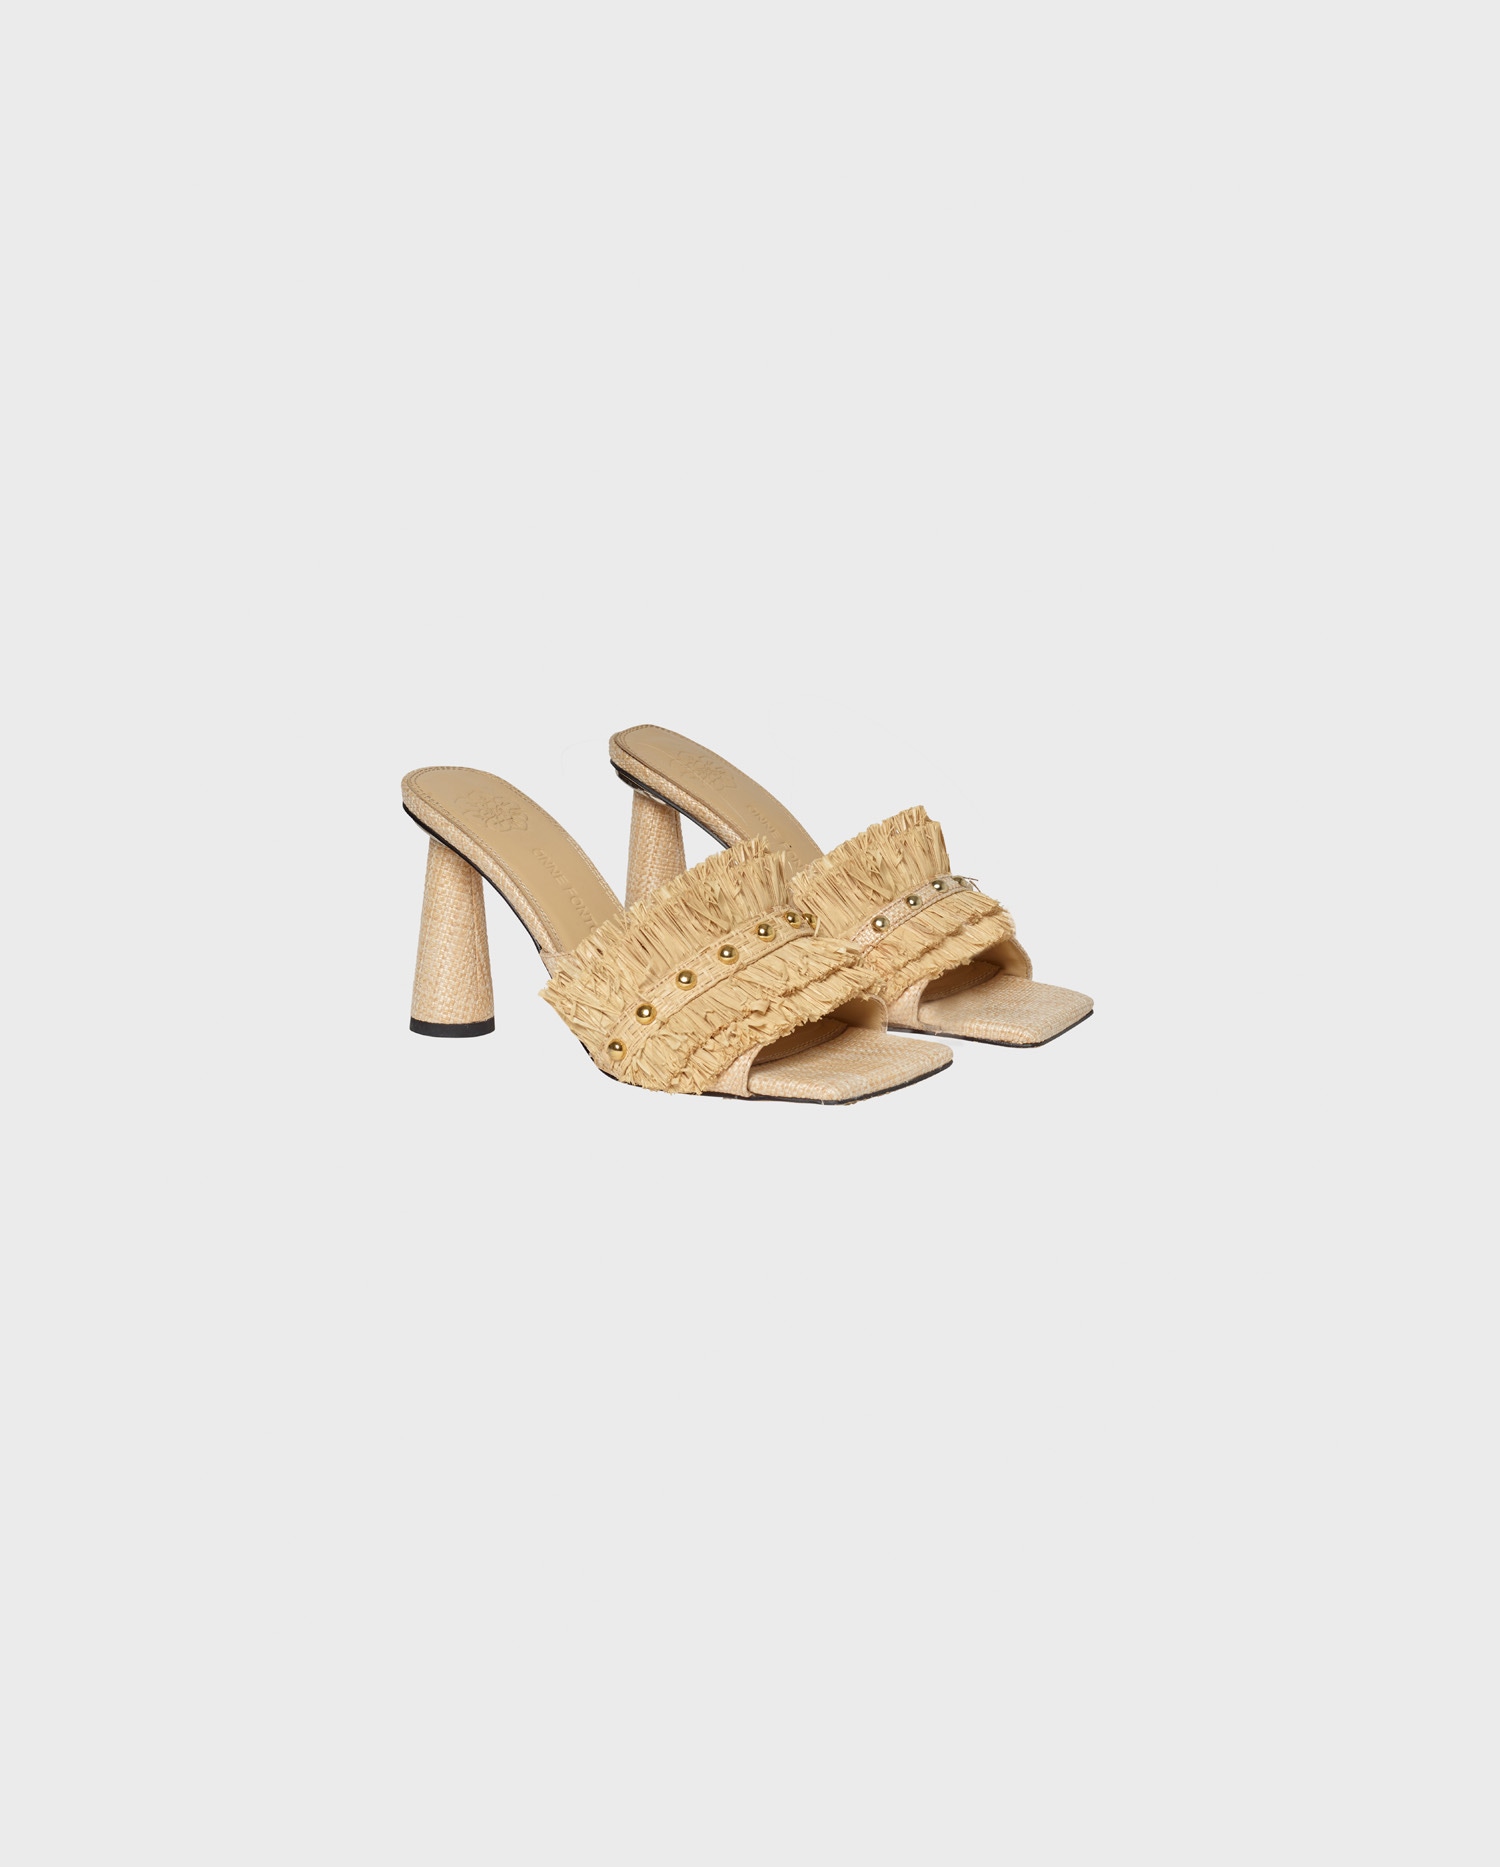 Discover the ALVAR Natural Leather Slides With Raffia Ruffle Details